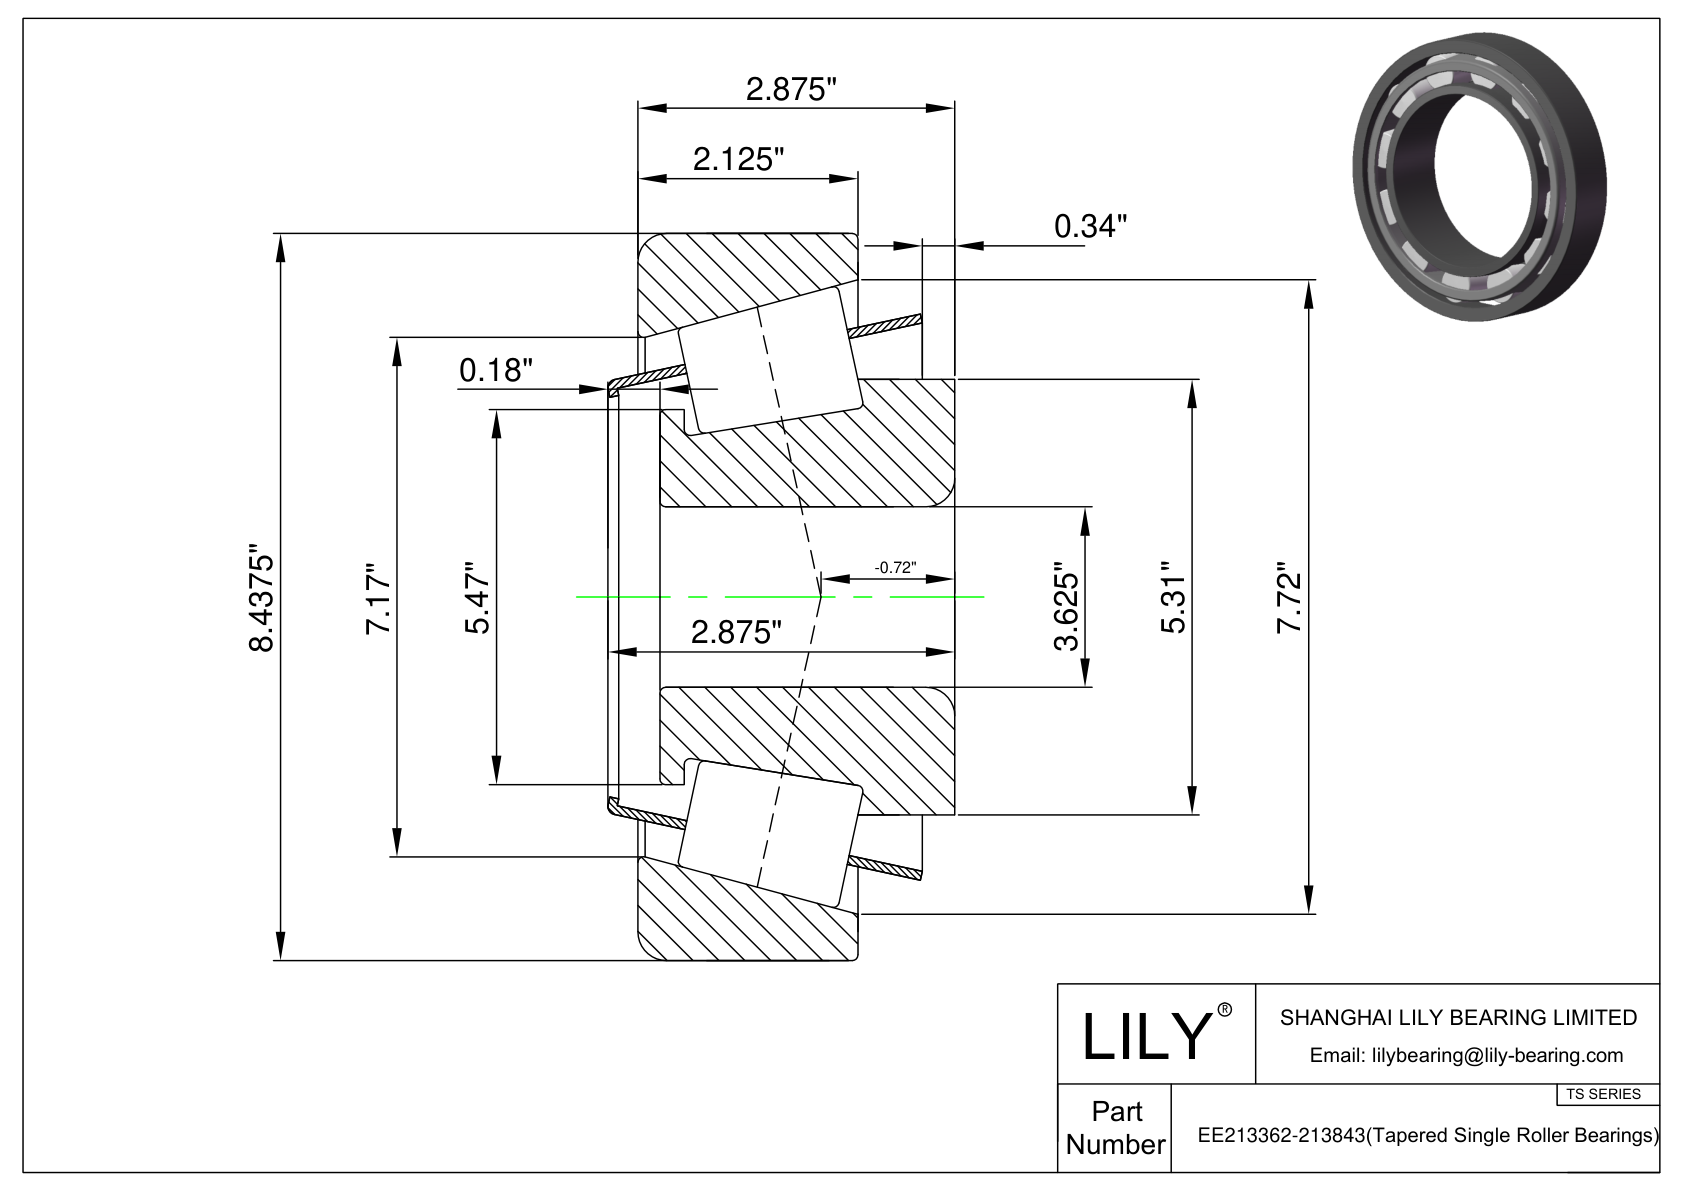 EE213362-213843 TS (Tapered Single Roller Bearings) (Imperial) cad drawing